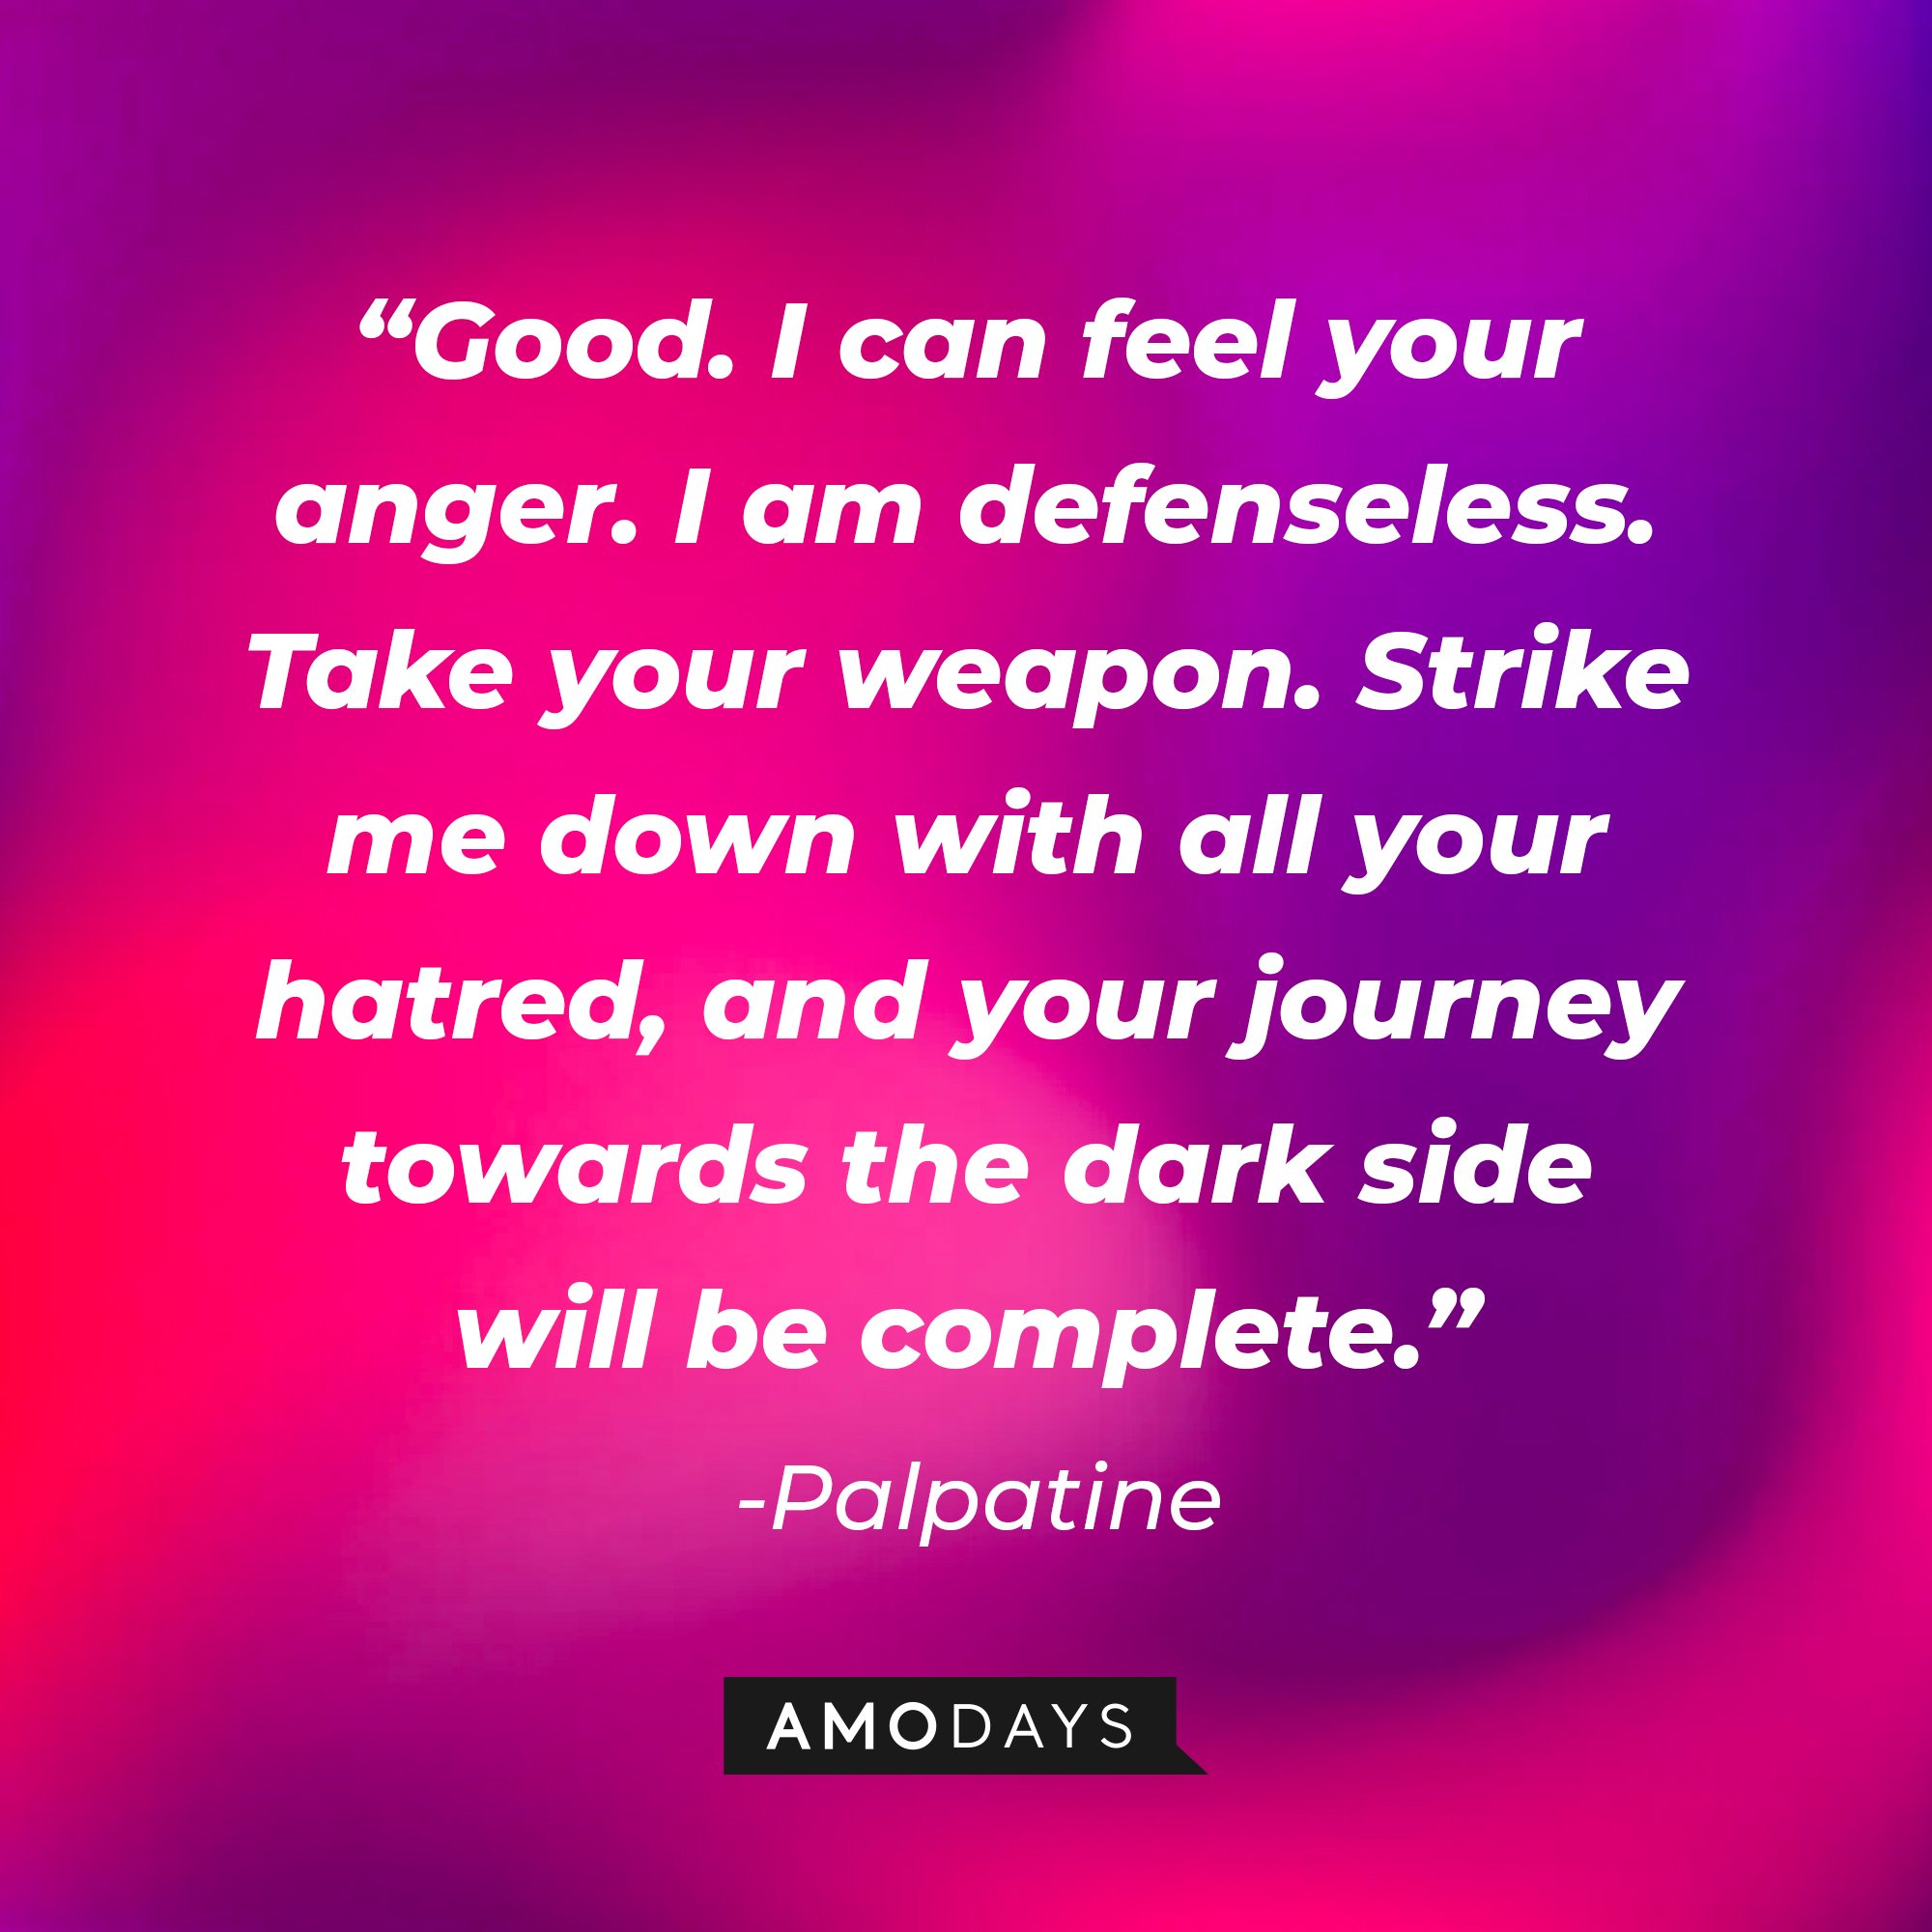 Palpatine's quote: “Good. I can feel your anger. I am defenseless. Take your weapon. Strike me down with all your hatred, and your journey towards the dark side will be complete.” | Image: AmoDays